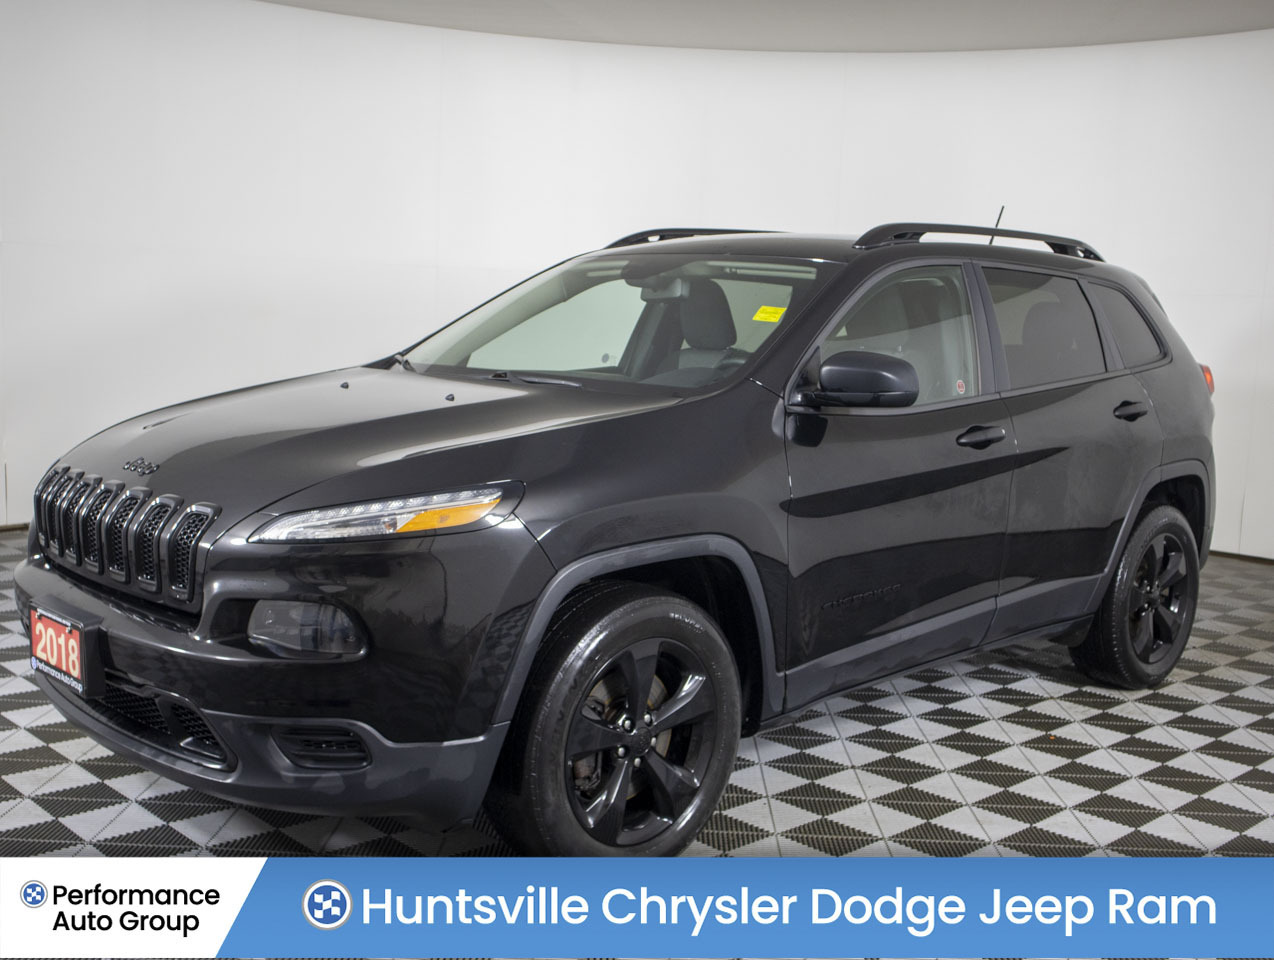 2018 Jeep Cherokee Sport- 3.2L V6- 4WD- Rearview Camera- Heated Seats